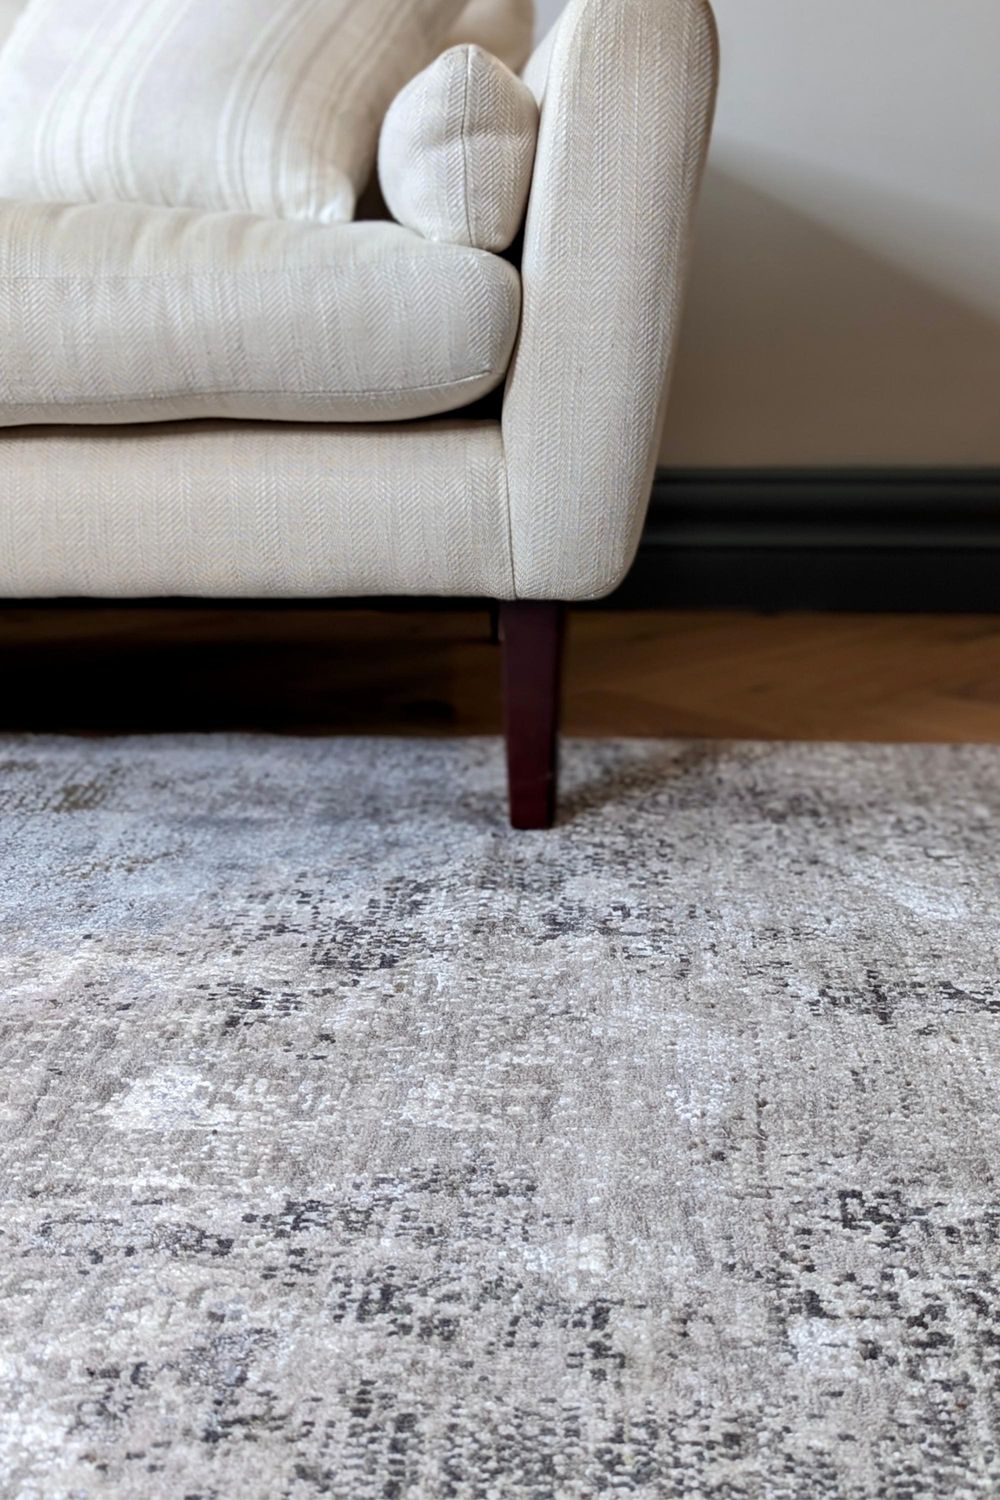 Large area rug with abstract design in grey and beige